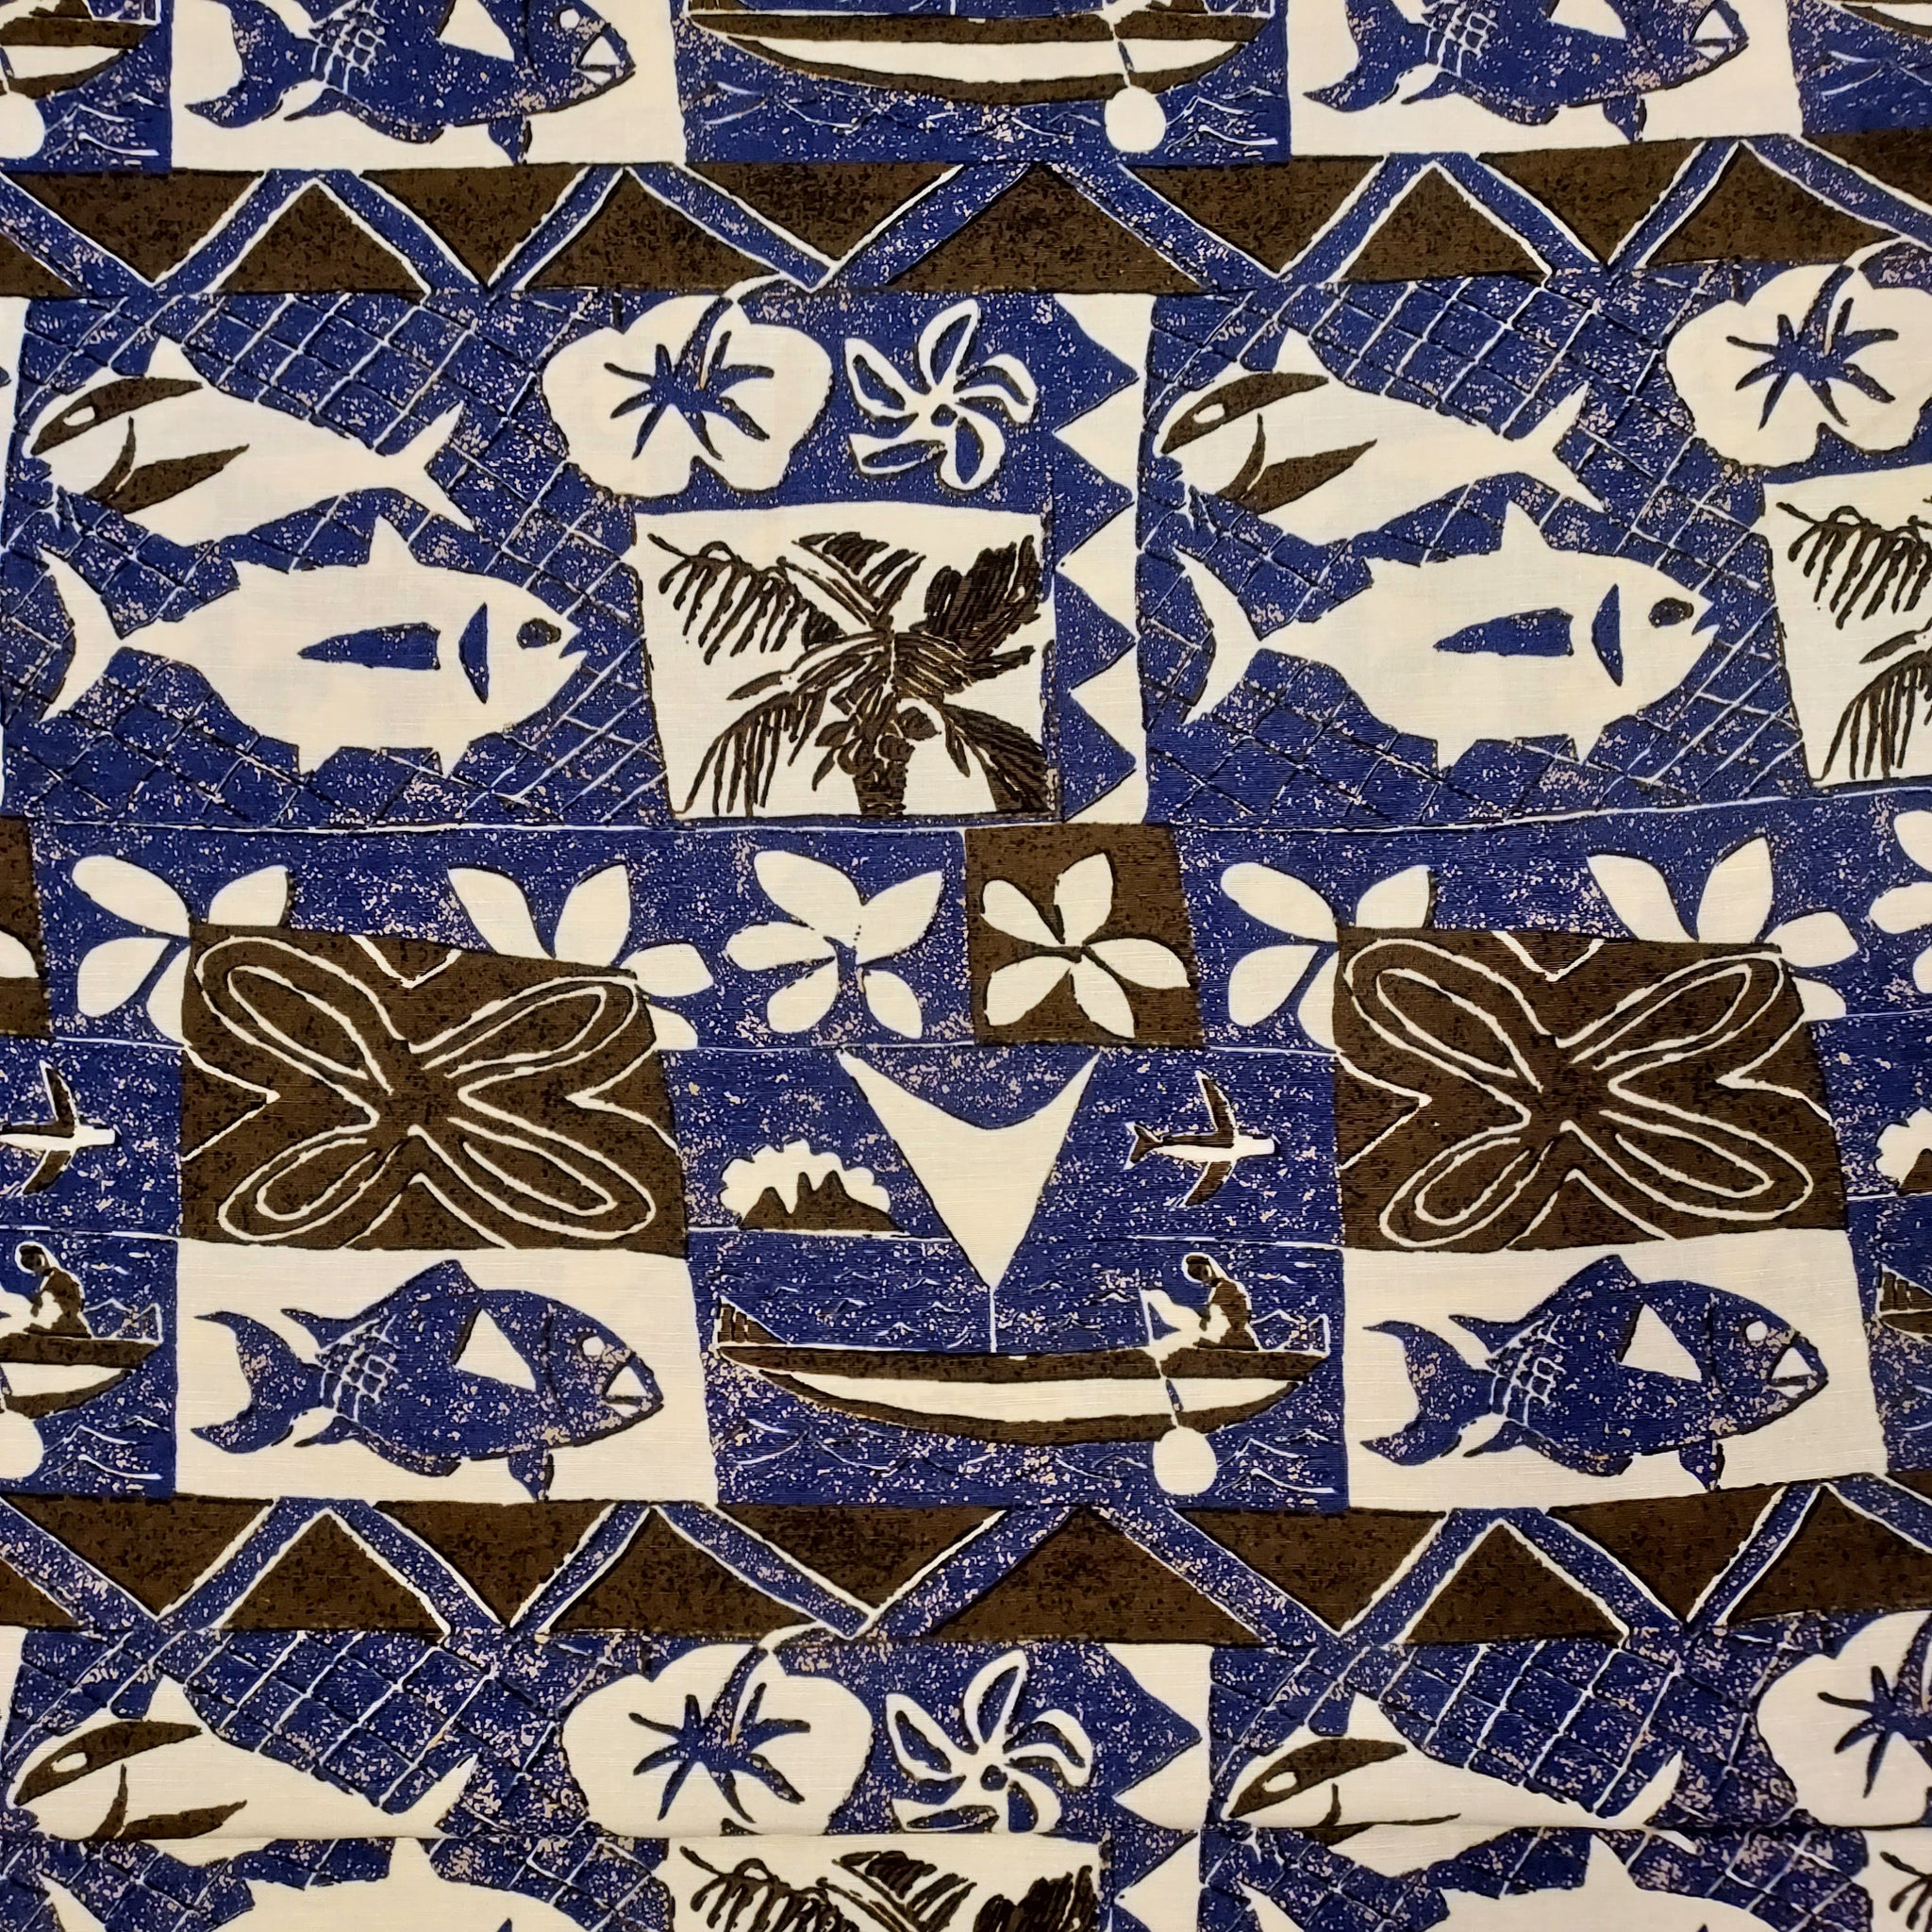 This fabric would make the best hawaiian shirt!  ©Kahala fabric it is full of island inspired images in browns, blues and whites. The block printing gives it texture! Make your next summer outfit with this pretty fabric. 